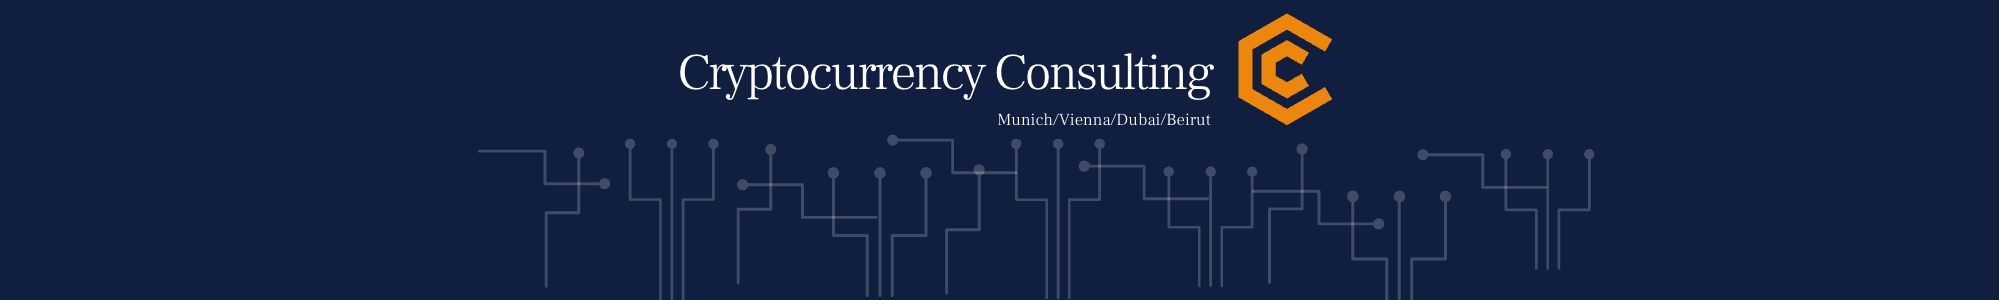 Cryptocurrencyconsulting bannière